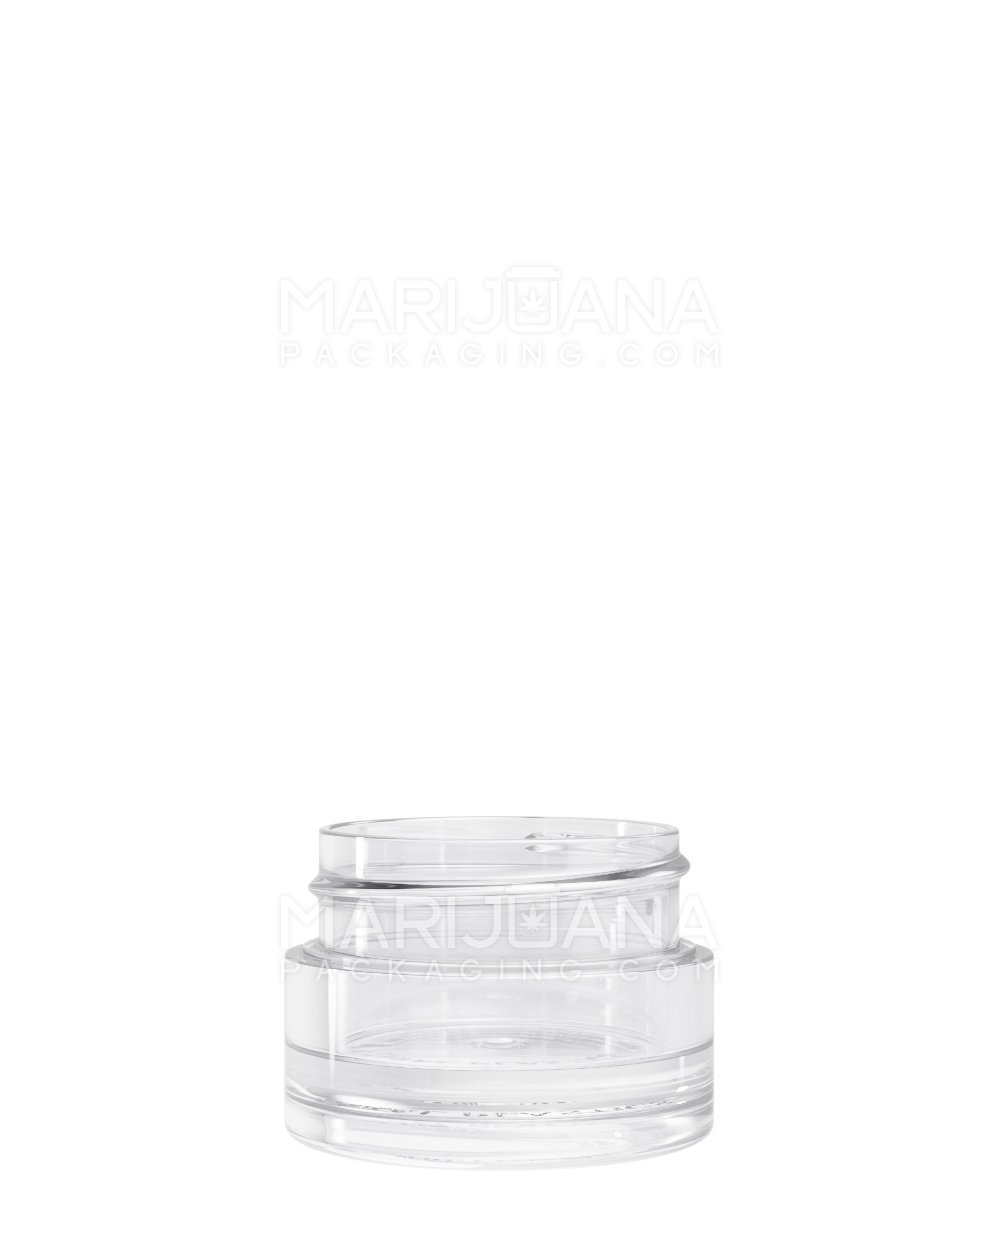 Clear Thick Wall Container w/ Screw Top Cap | 3.7mL - Plastic - 1300 Count - 3